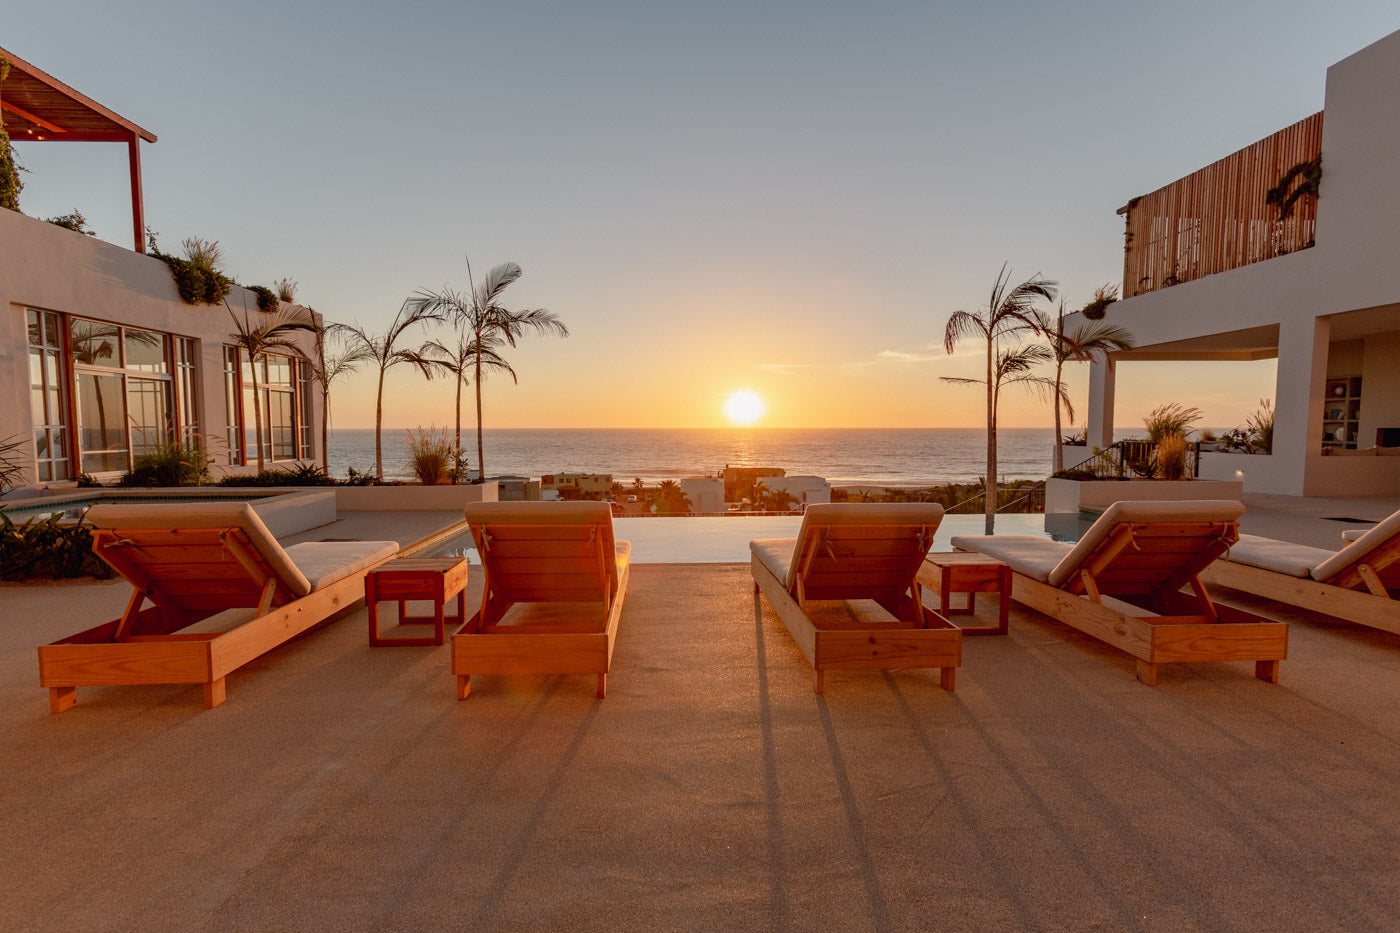 image of the pool overlooking the ocean at the location in Baja california, mexico for the soulside spring renewal and recovery yoga retreat